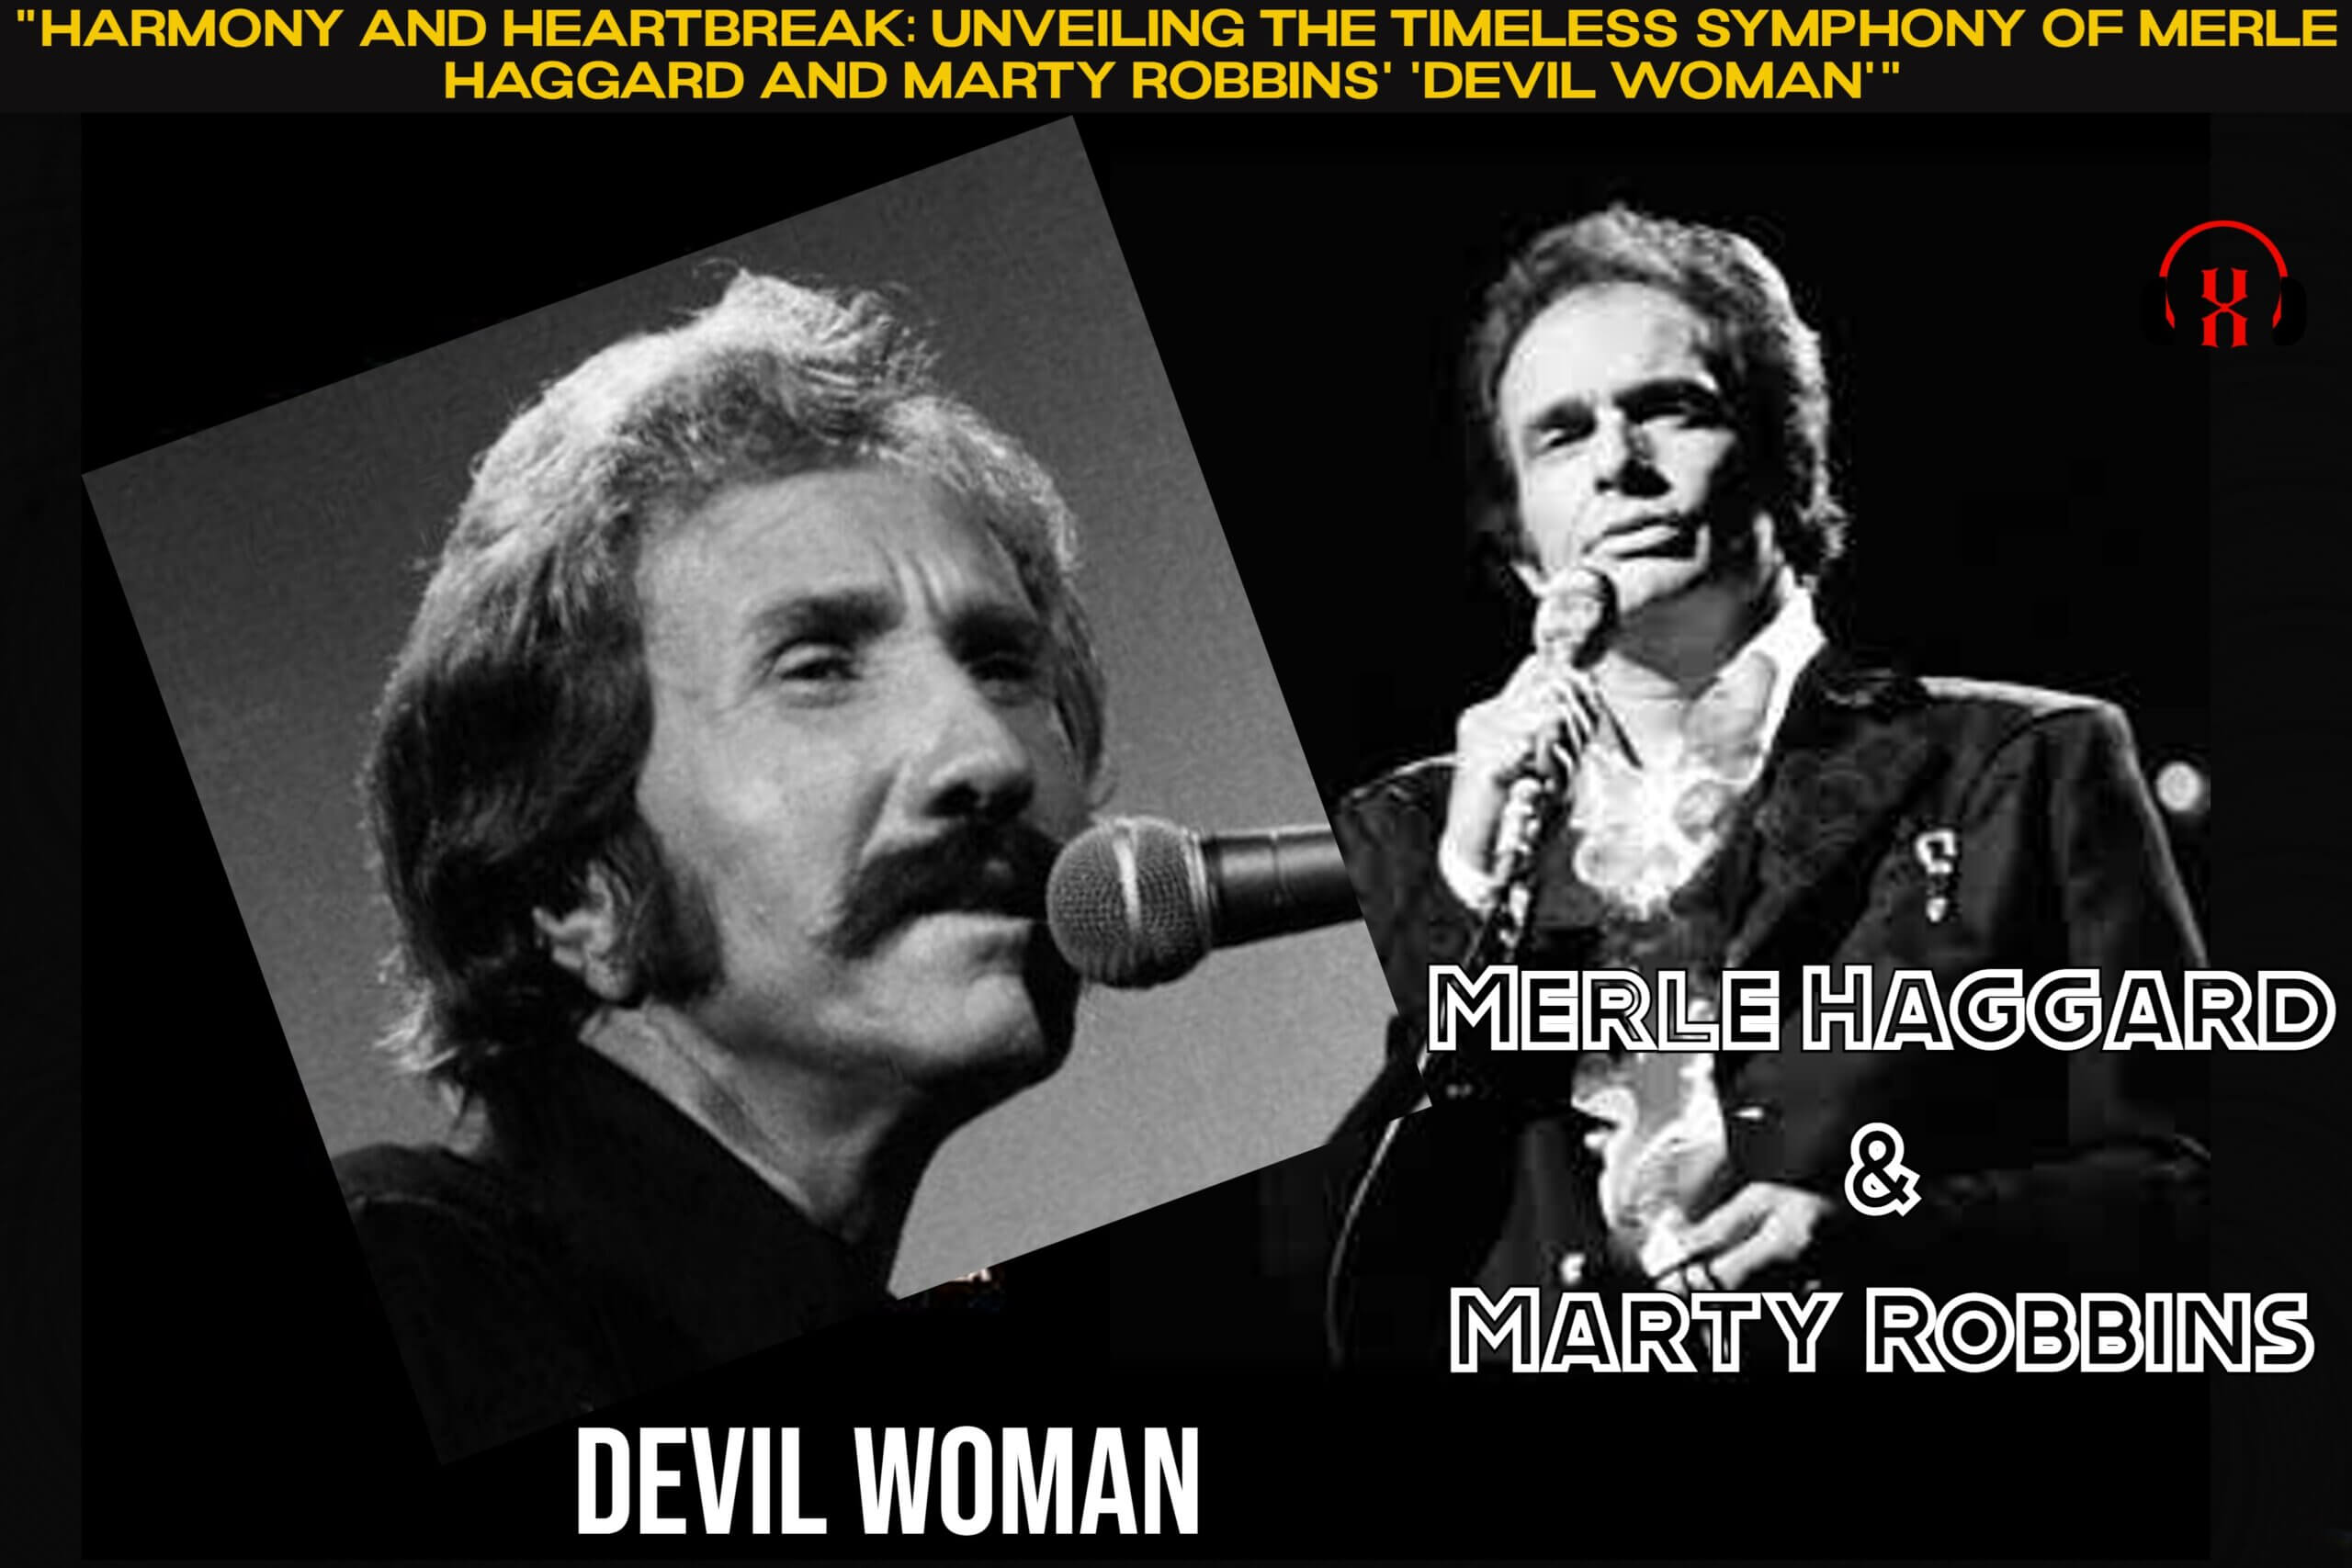 “Harmony and Heartbreak: Unveiling the Timeless Symphony of Merle Haggard and Marty Robbins’ ‘Devil Woman'”